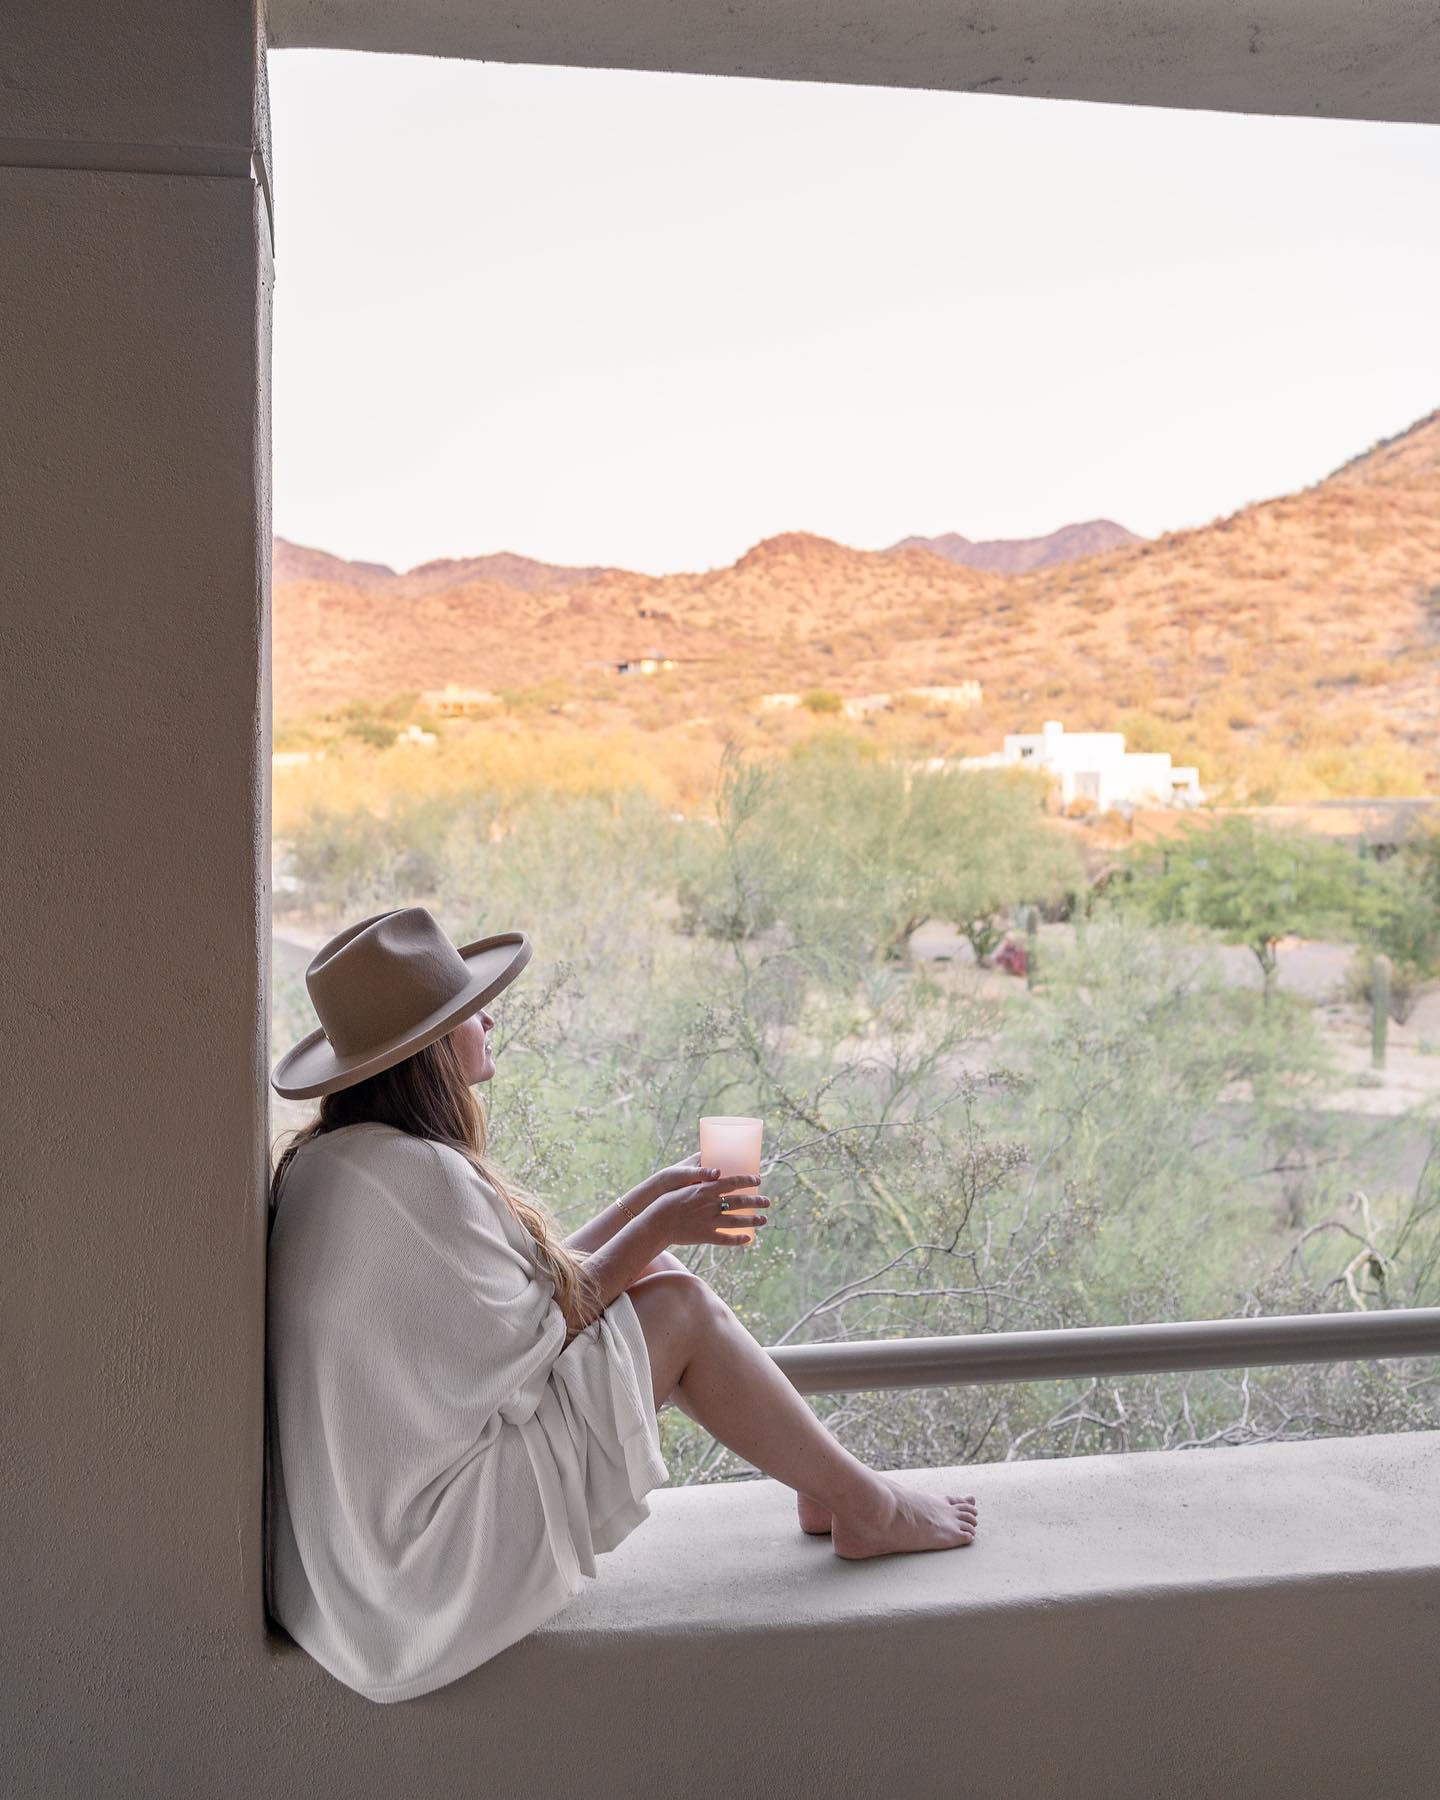 Woman looking out into desert. Woman sitting on edge of window drinking wine. Woman wearing hat and poncho. Woman wearing poncho. Woman on vacation in the desert.